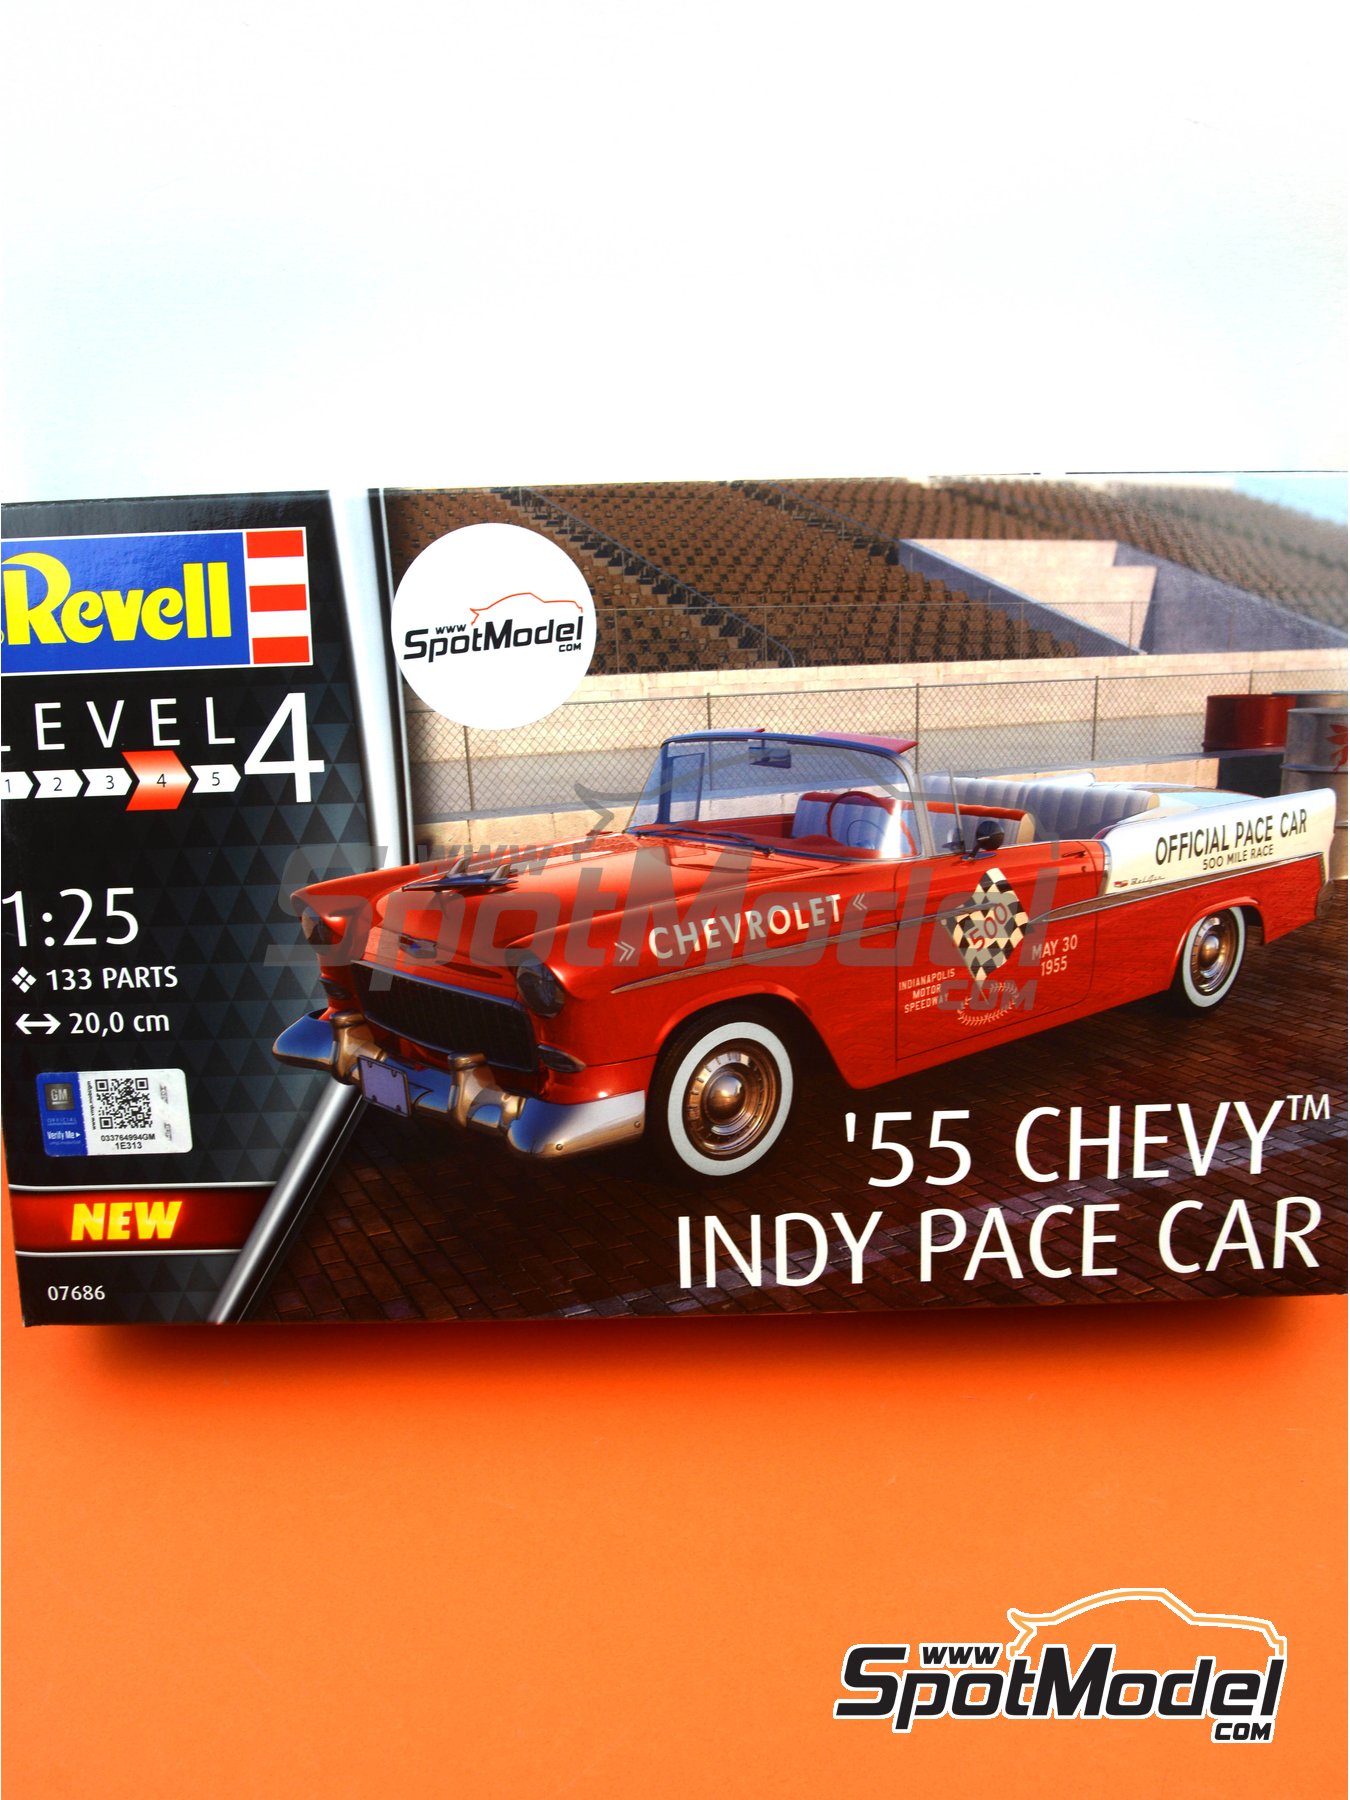 revell muscle car models